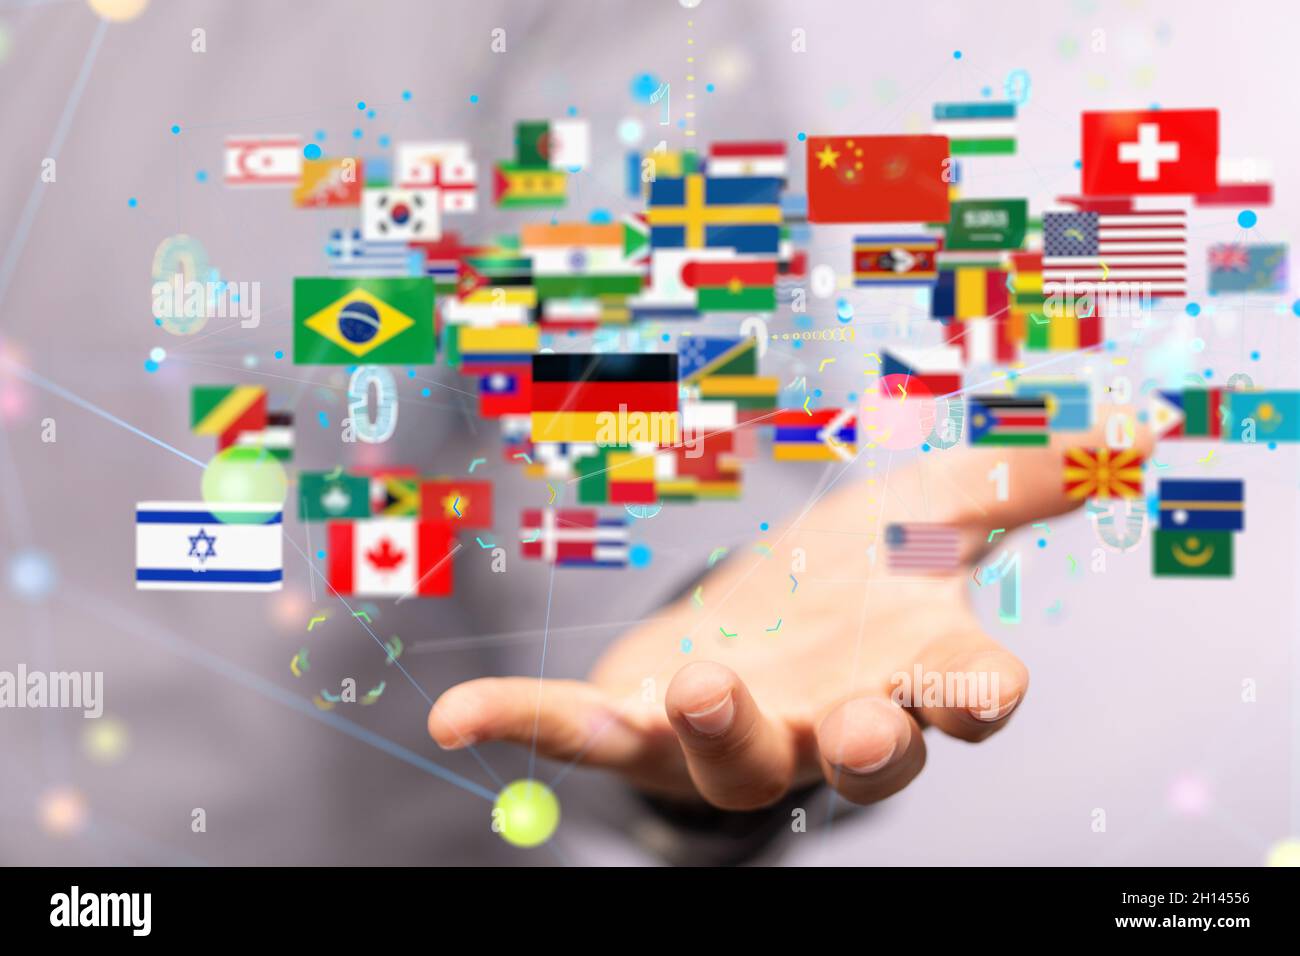 Illustration of international counties flags in hands of a human Stock Photo